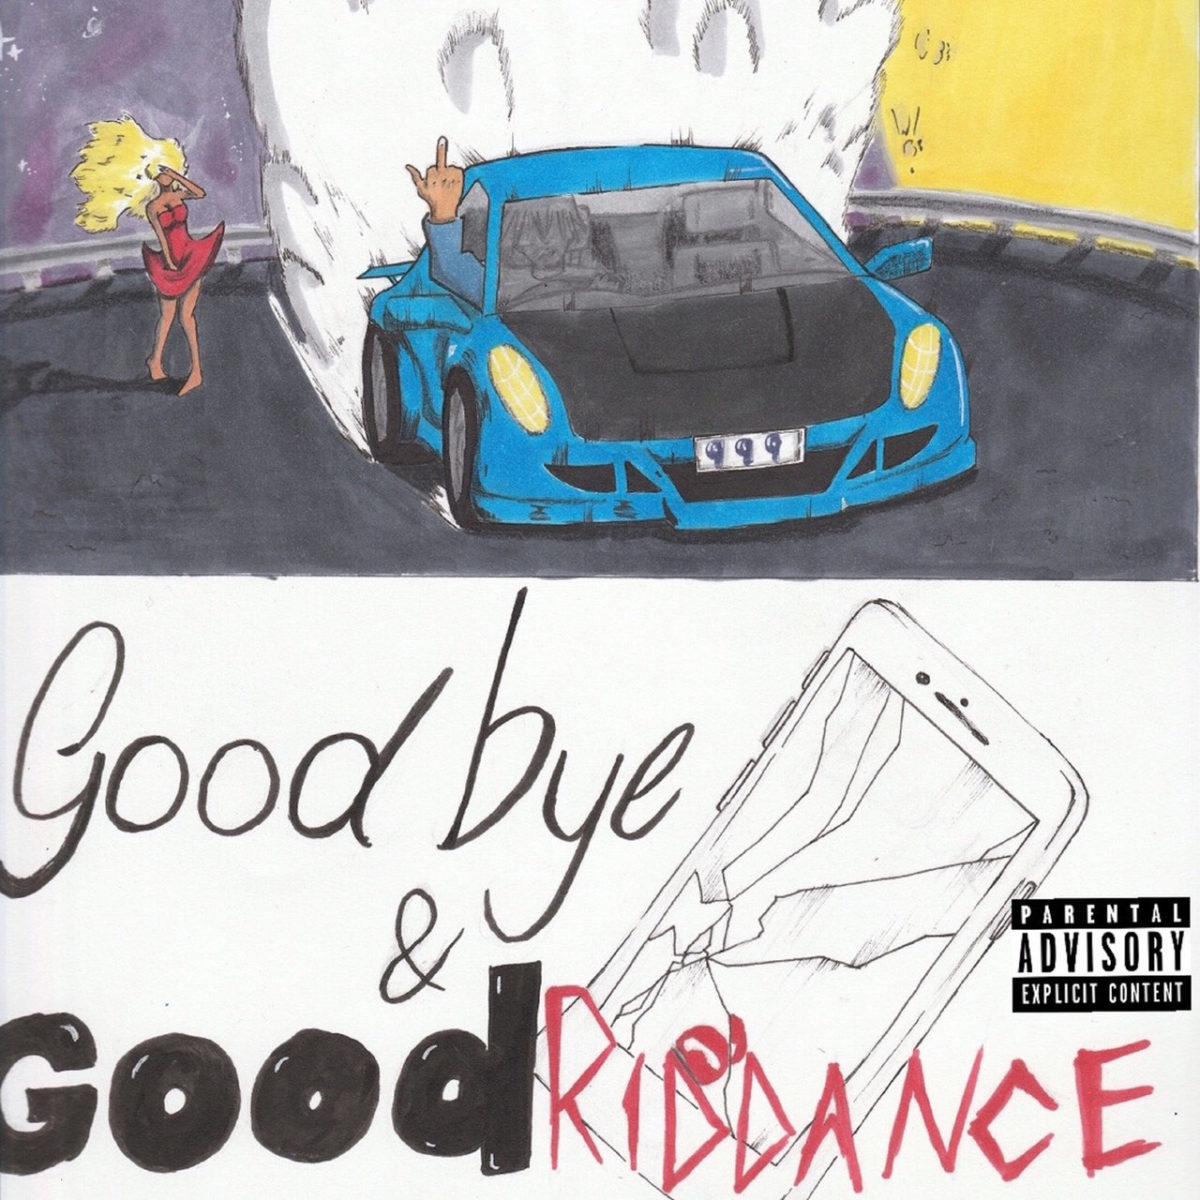 Juice Wrld - Goodbye and Good Riddance (Reissue) (Cover)